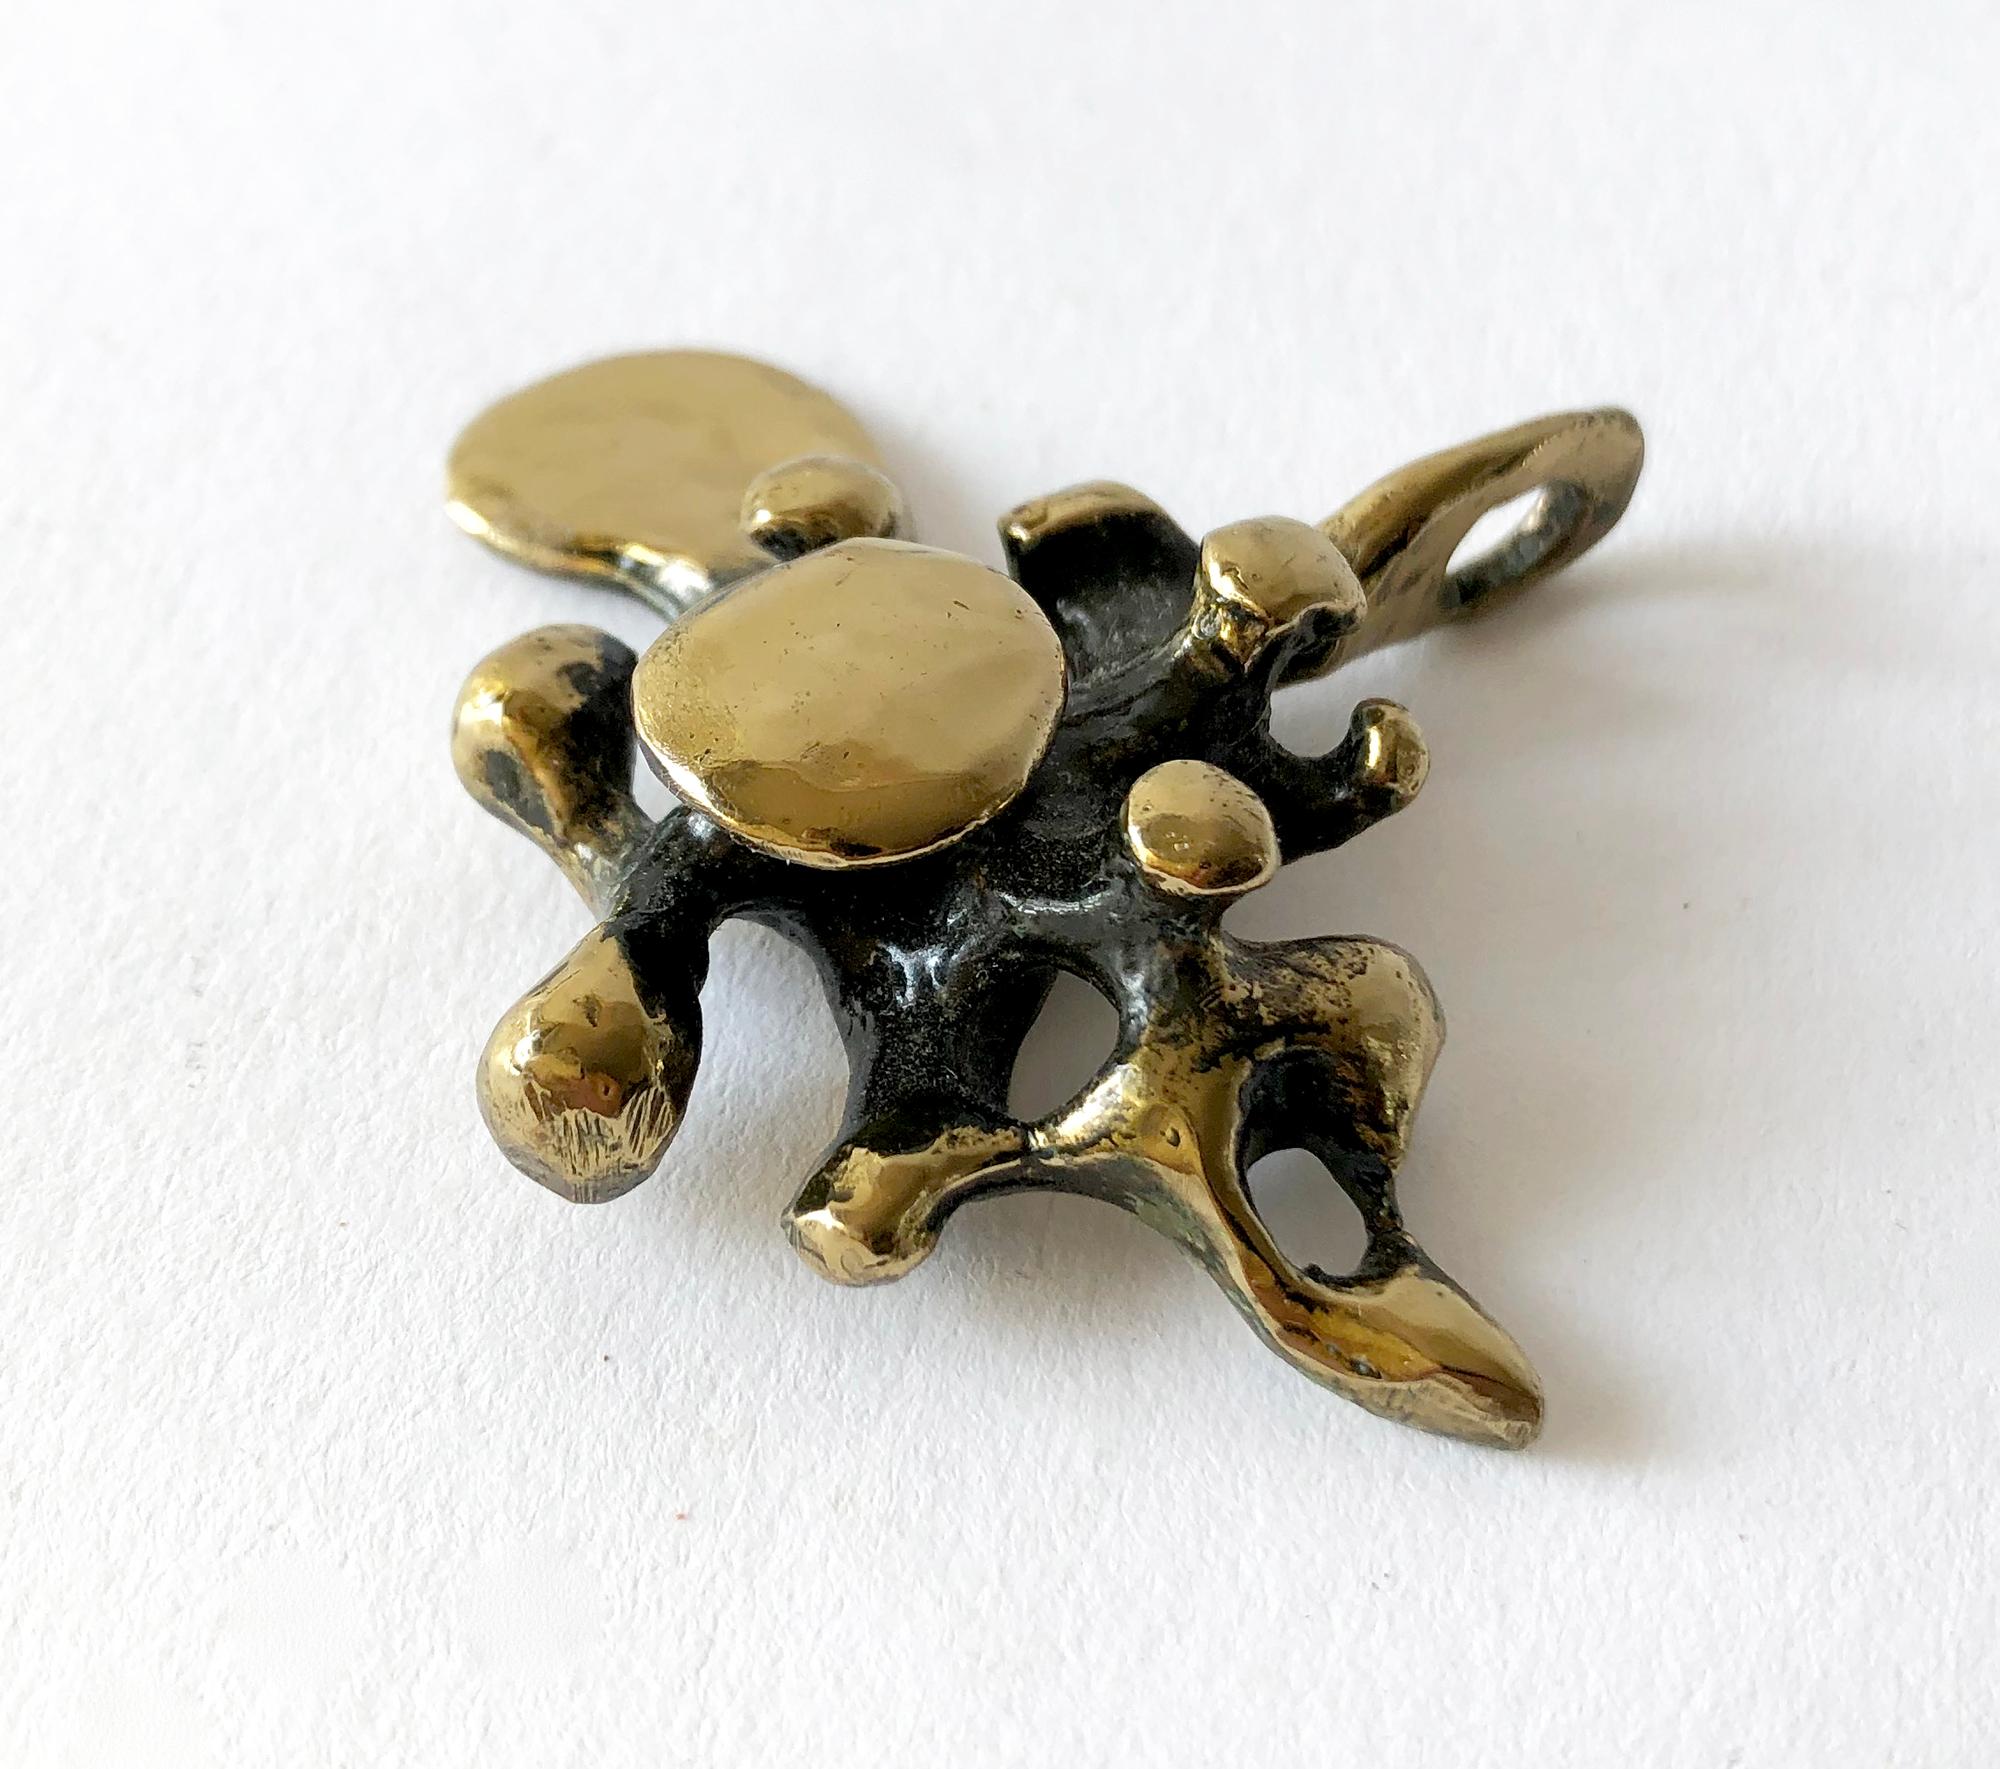 Bronze spore pendant created by sculptor and jeweler Jack Boyd  of San Diego, California. Pendant measures 2 1/8